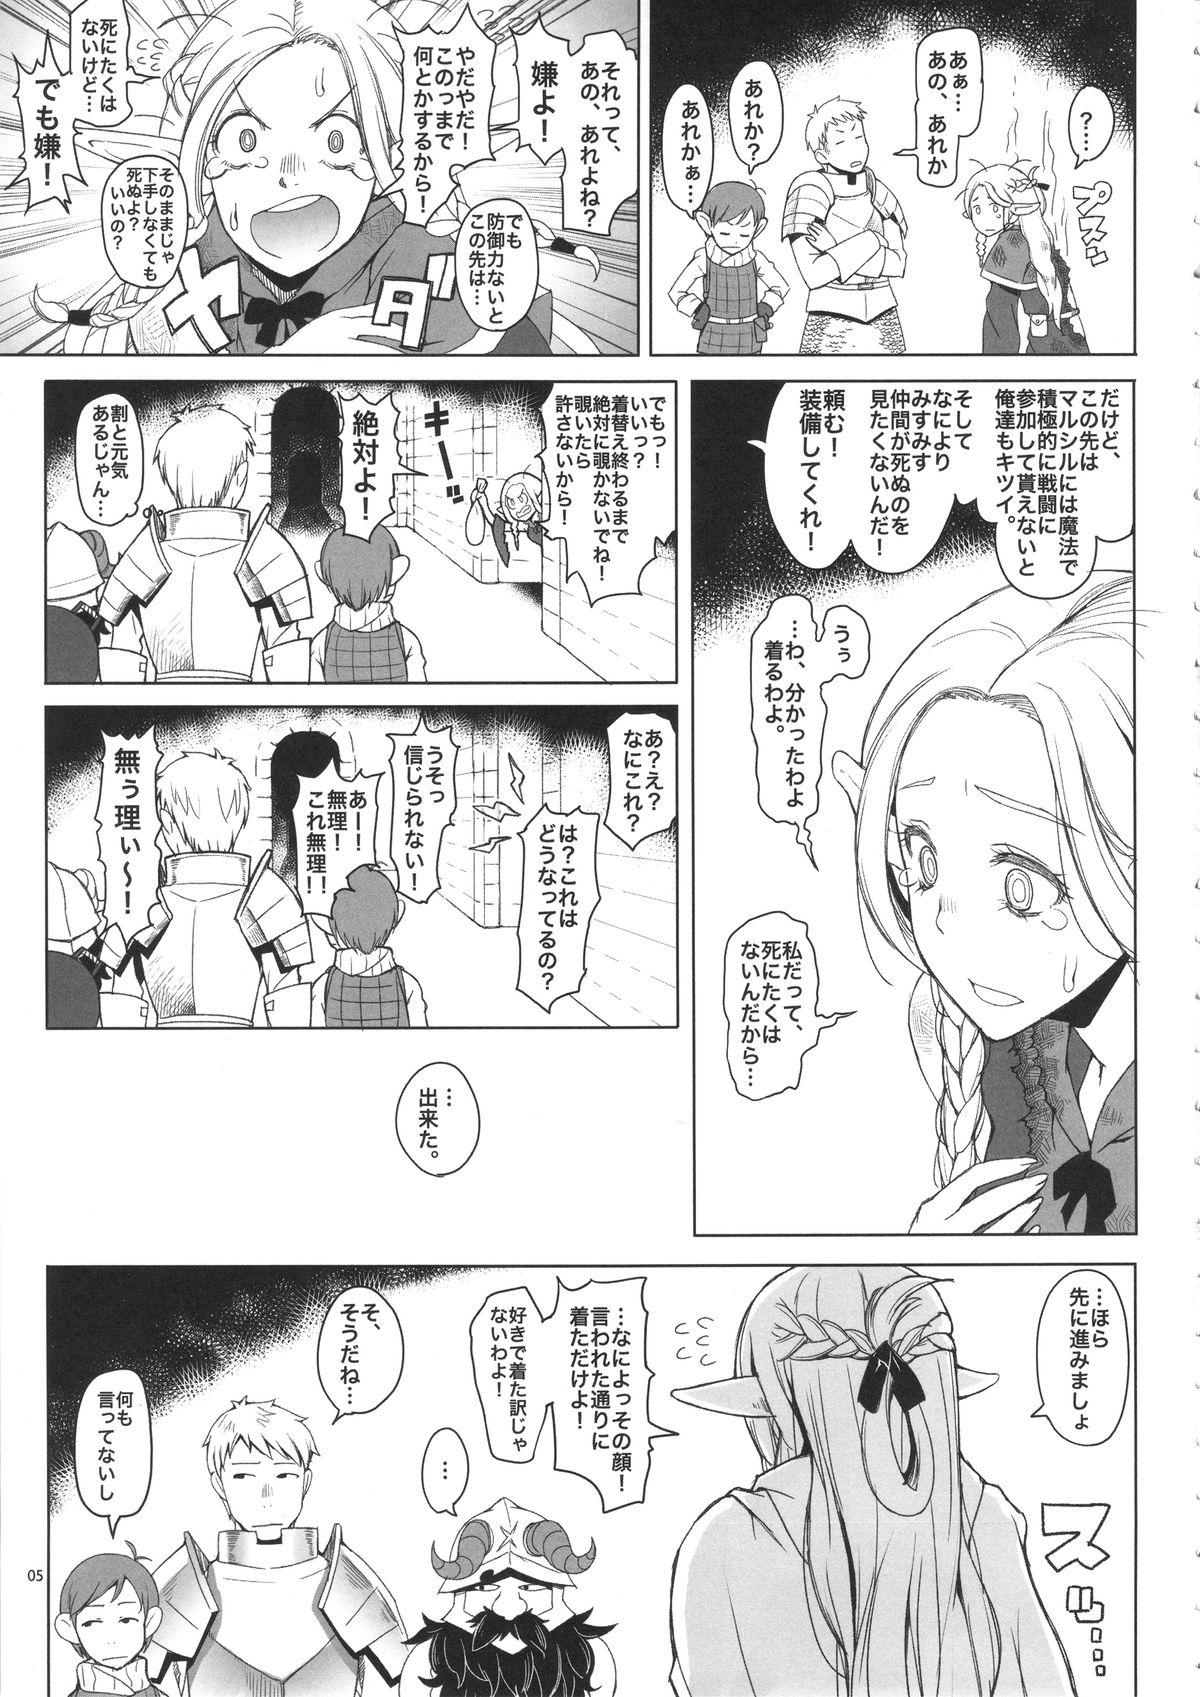 Fitness Marcille Meshi - Dungeon meshi Freaky - Page 4